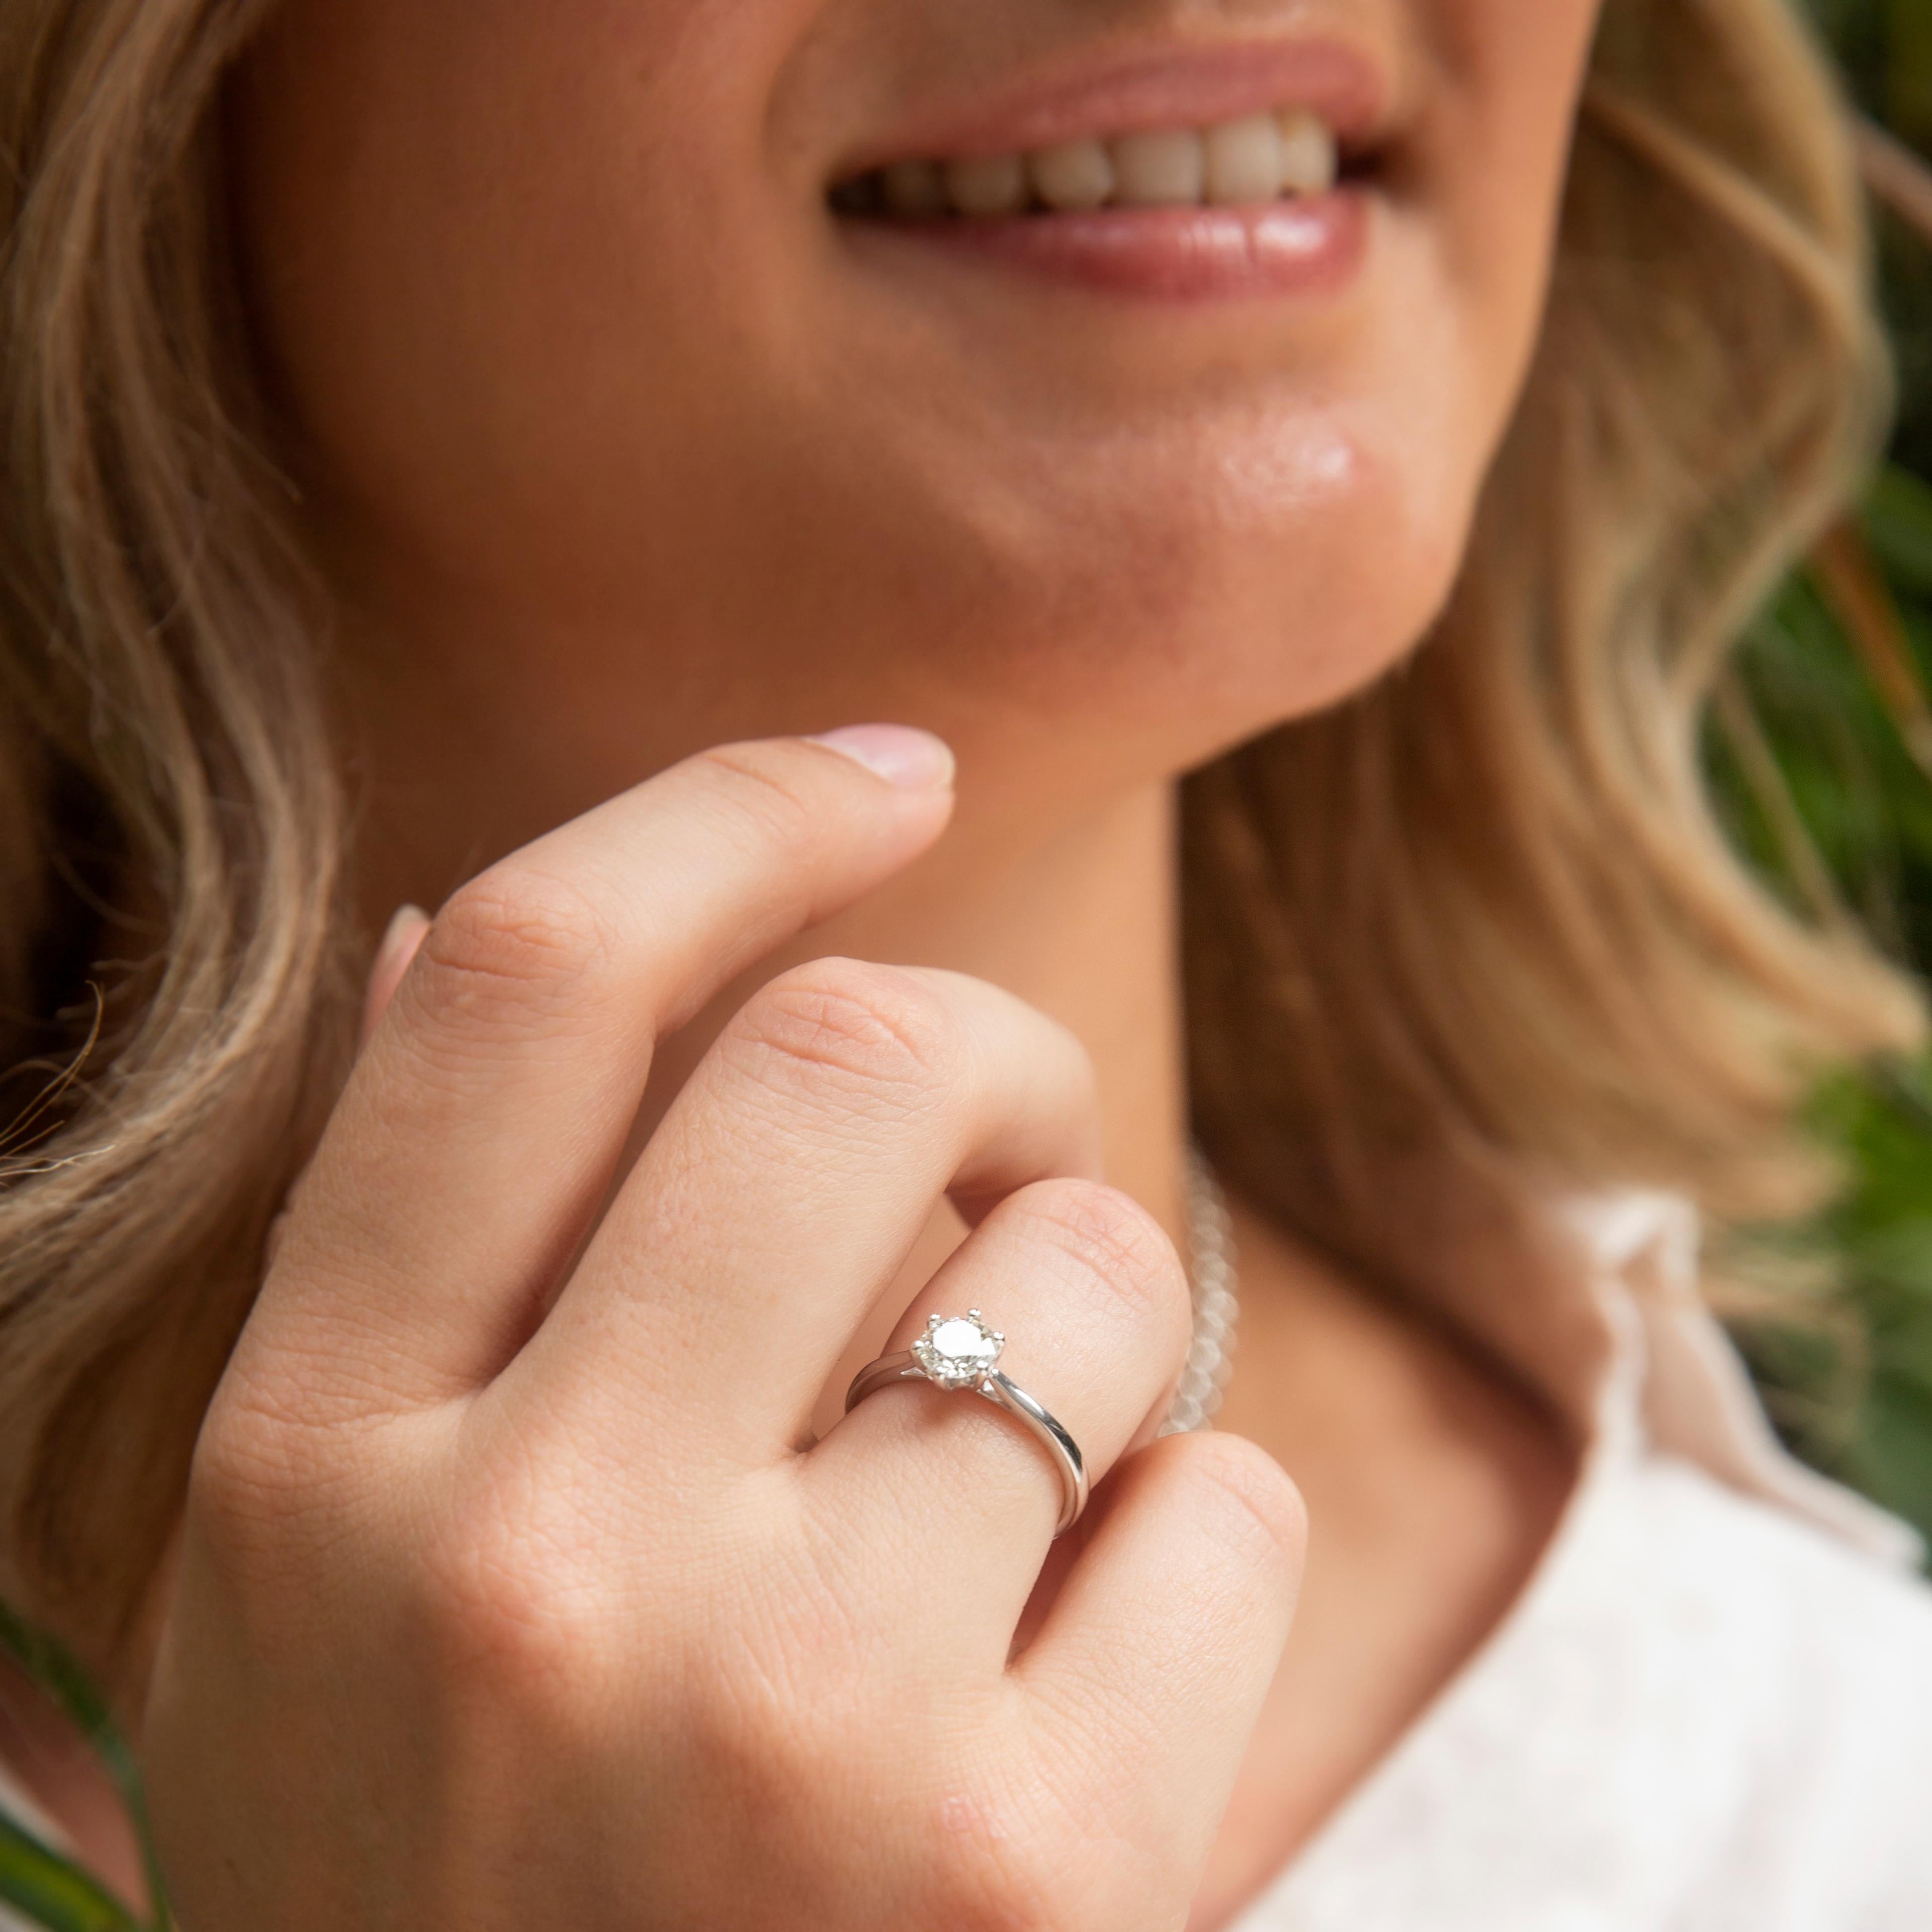 Forged in 18 carat white gold, this fabulous contemporary solitaire ring features a gorgeous 0.66 carat round brilliant cut diamond perched atop a gleaming band. This delightful ring is named The Orla Ring. With a centrepiece diamond perched just